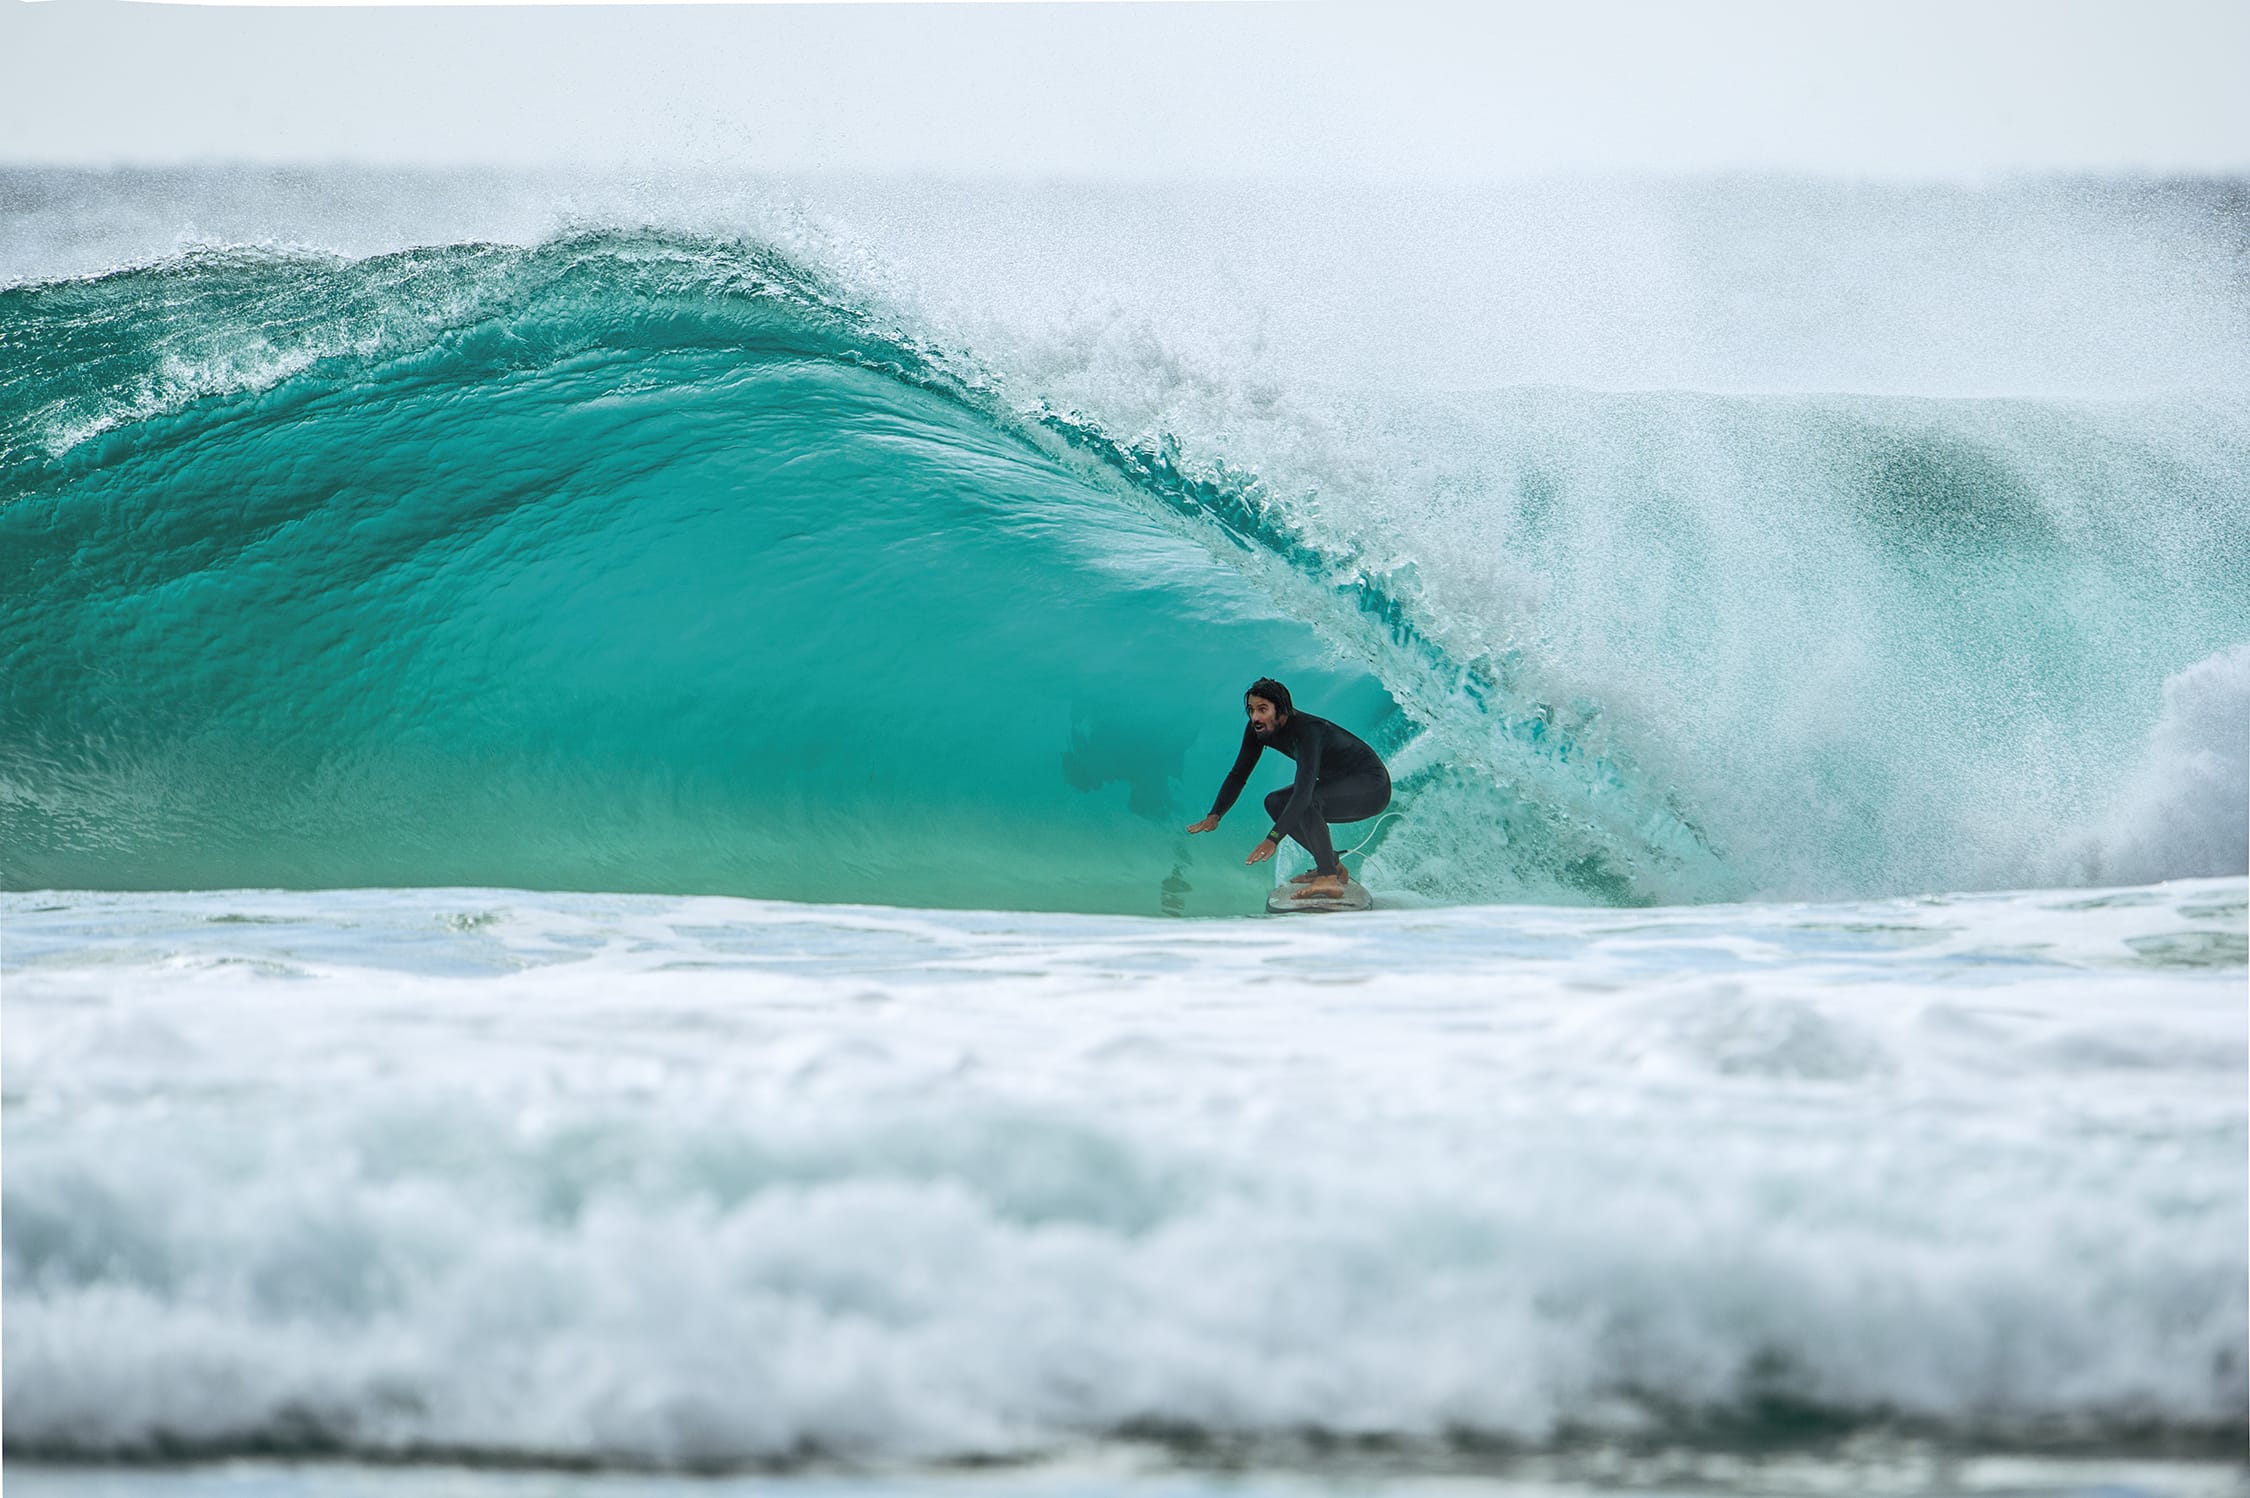 Carving Space for More Black Surfers - Patagonia Stories